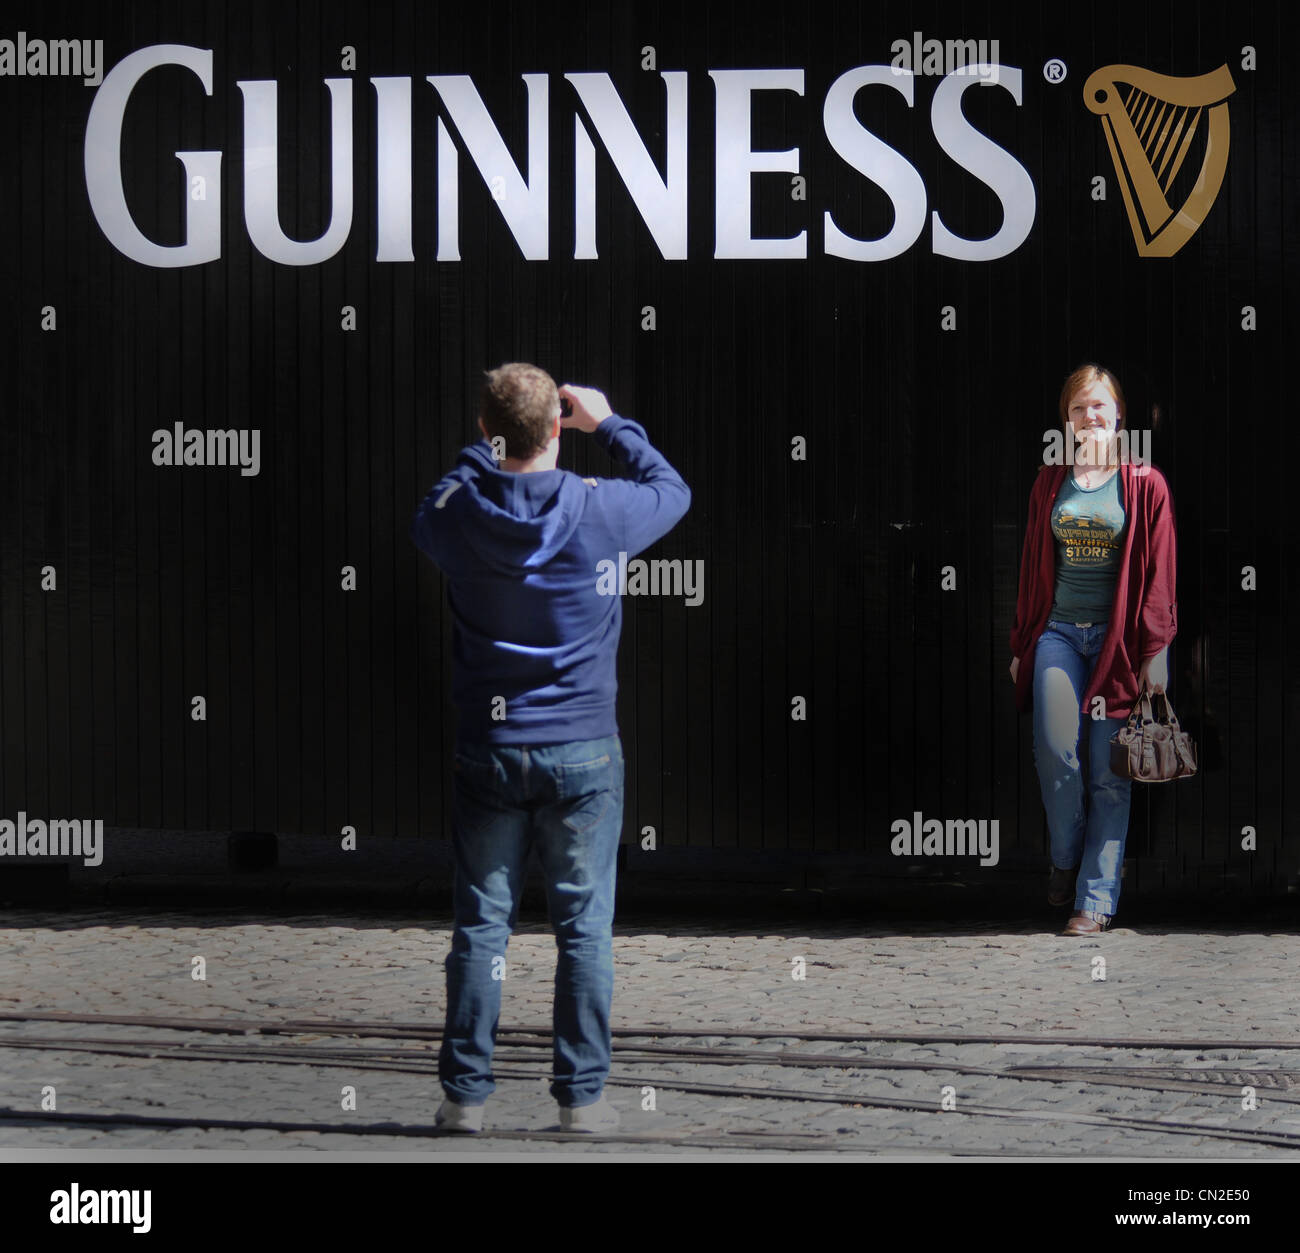 POSING FOR A PICTURE OUTSIDE THE WORLD FAMOUS GUINNES BREWERY IN DUBLIN. Stock Photo